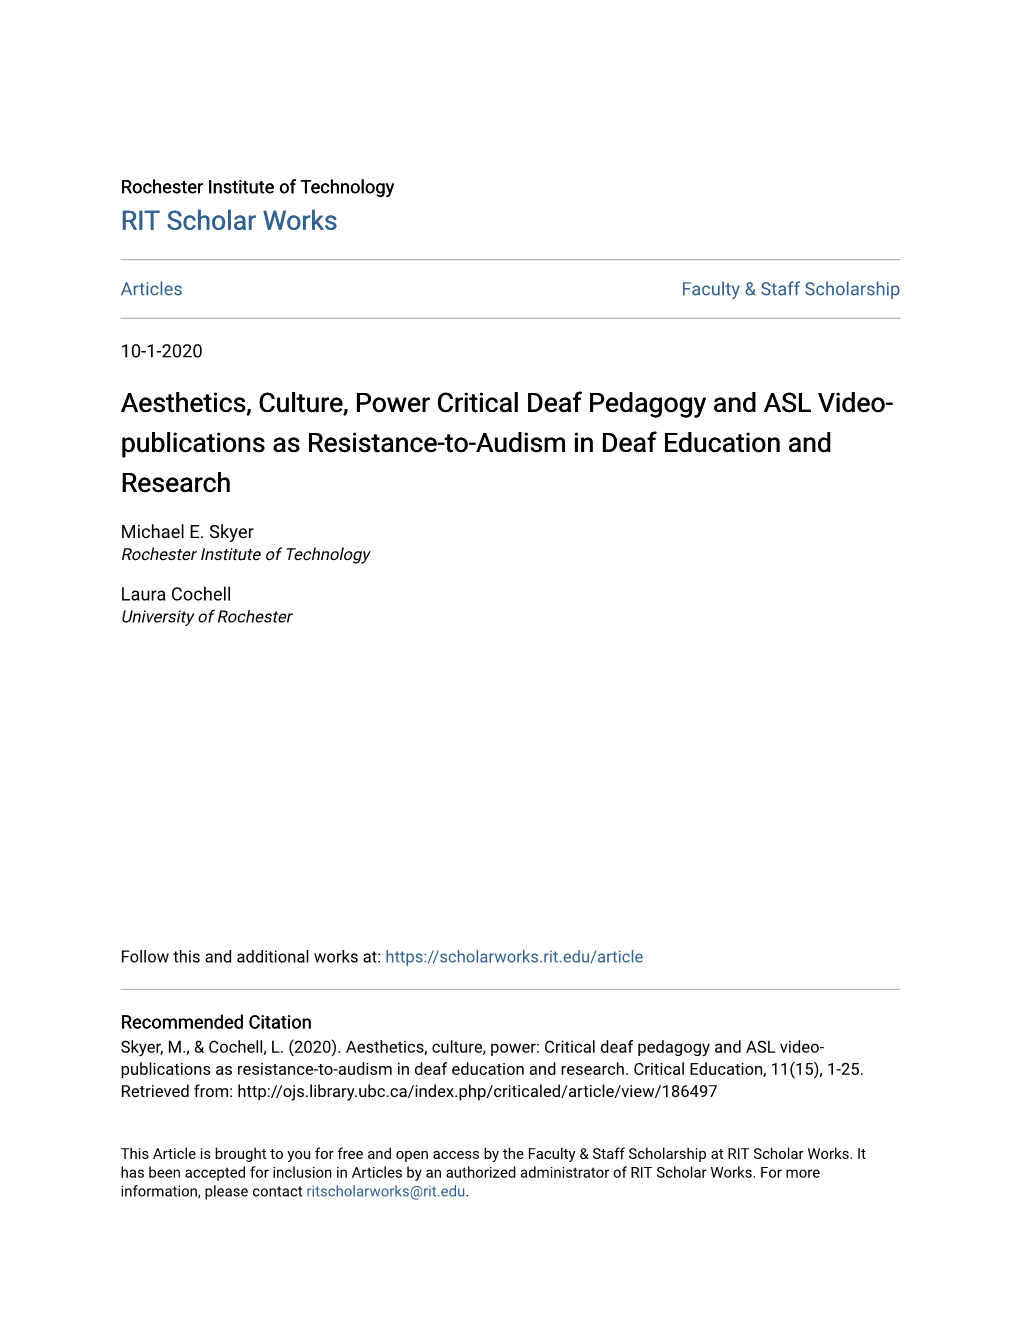 Aesthetics, Culture, Power Critical Deaf Pedagogy and ASL Video-Publications As Resistance-To-Audism in Deaf Education and Research